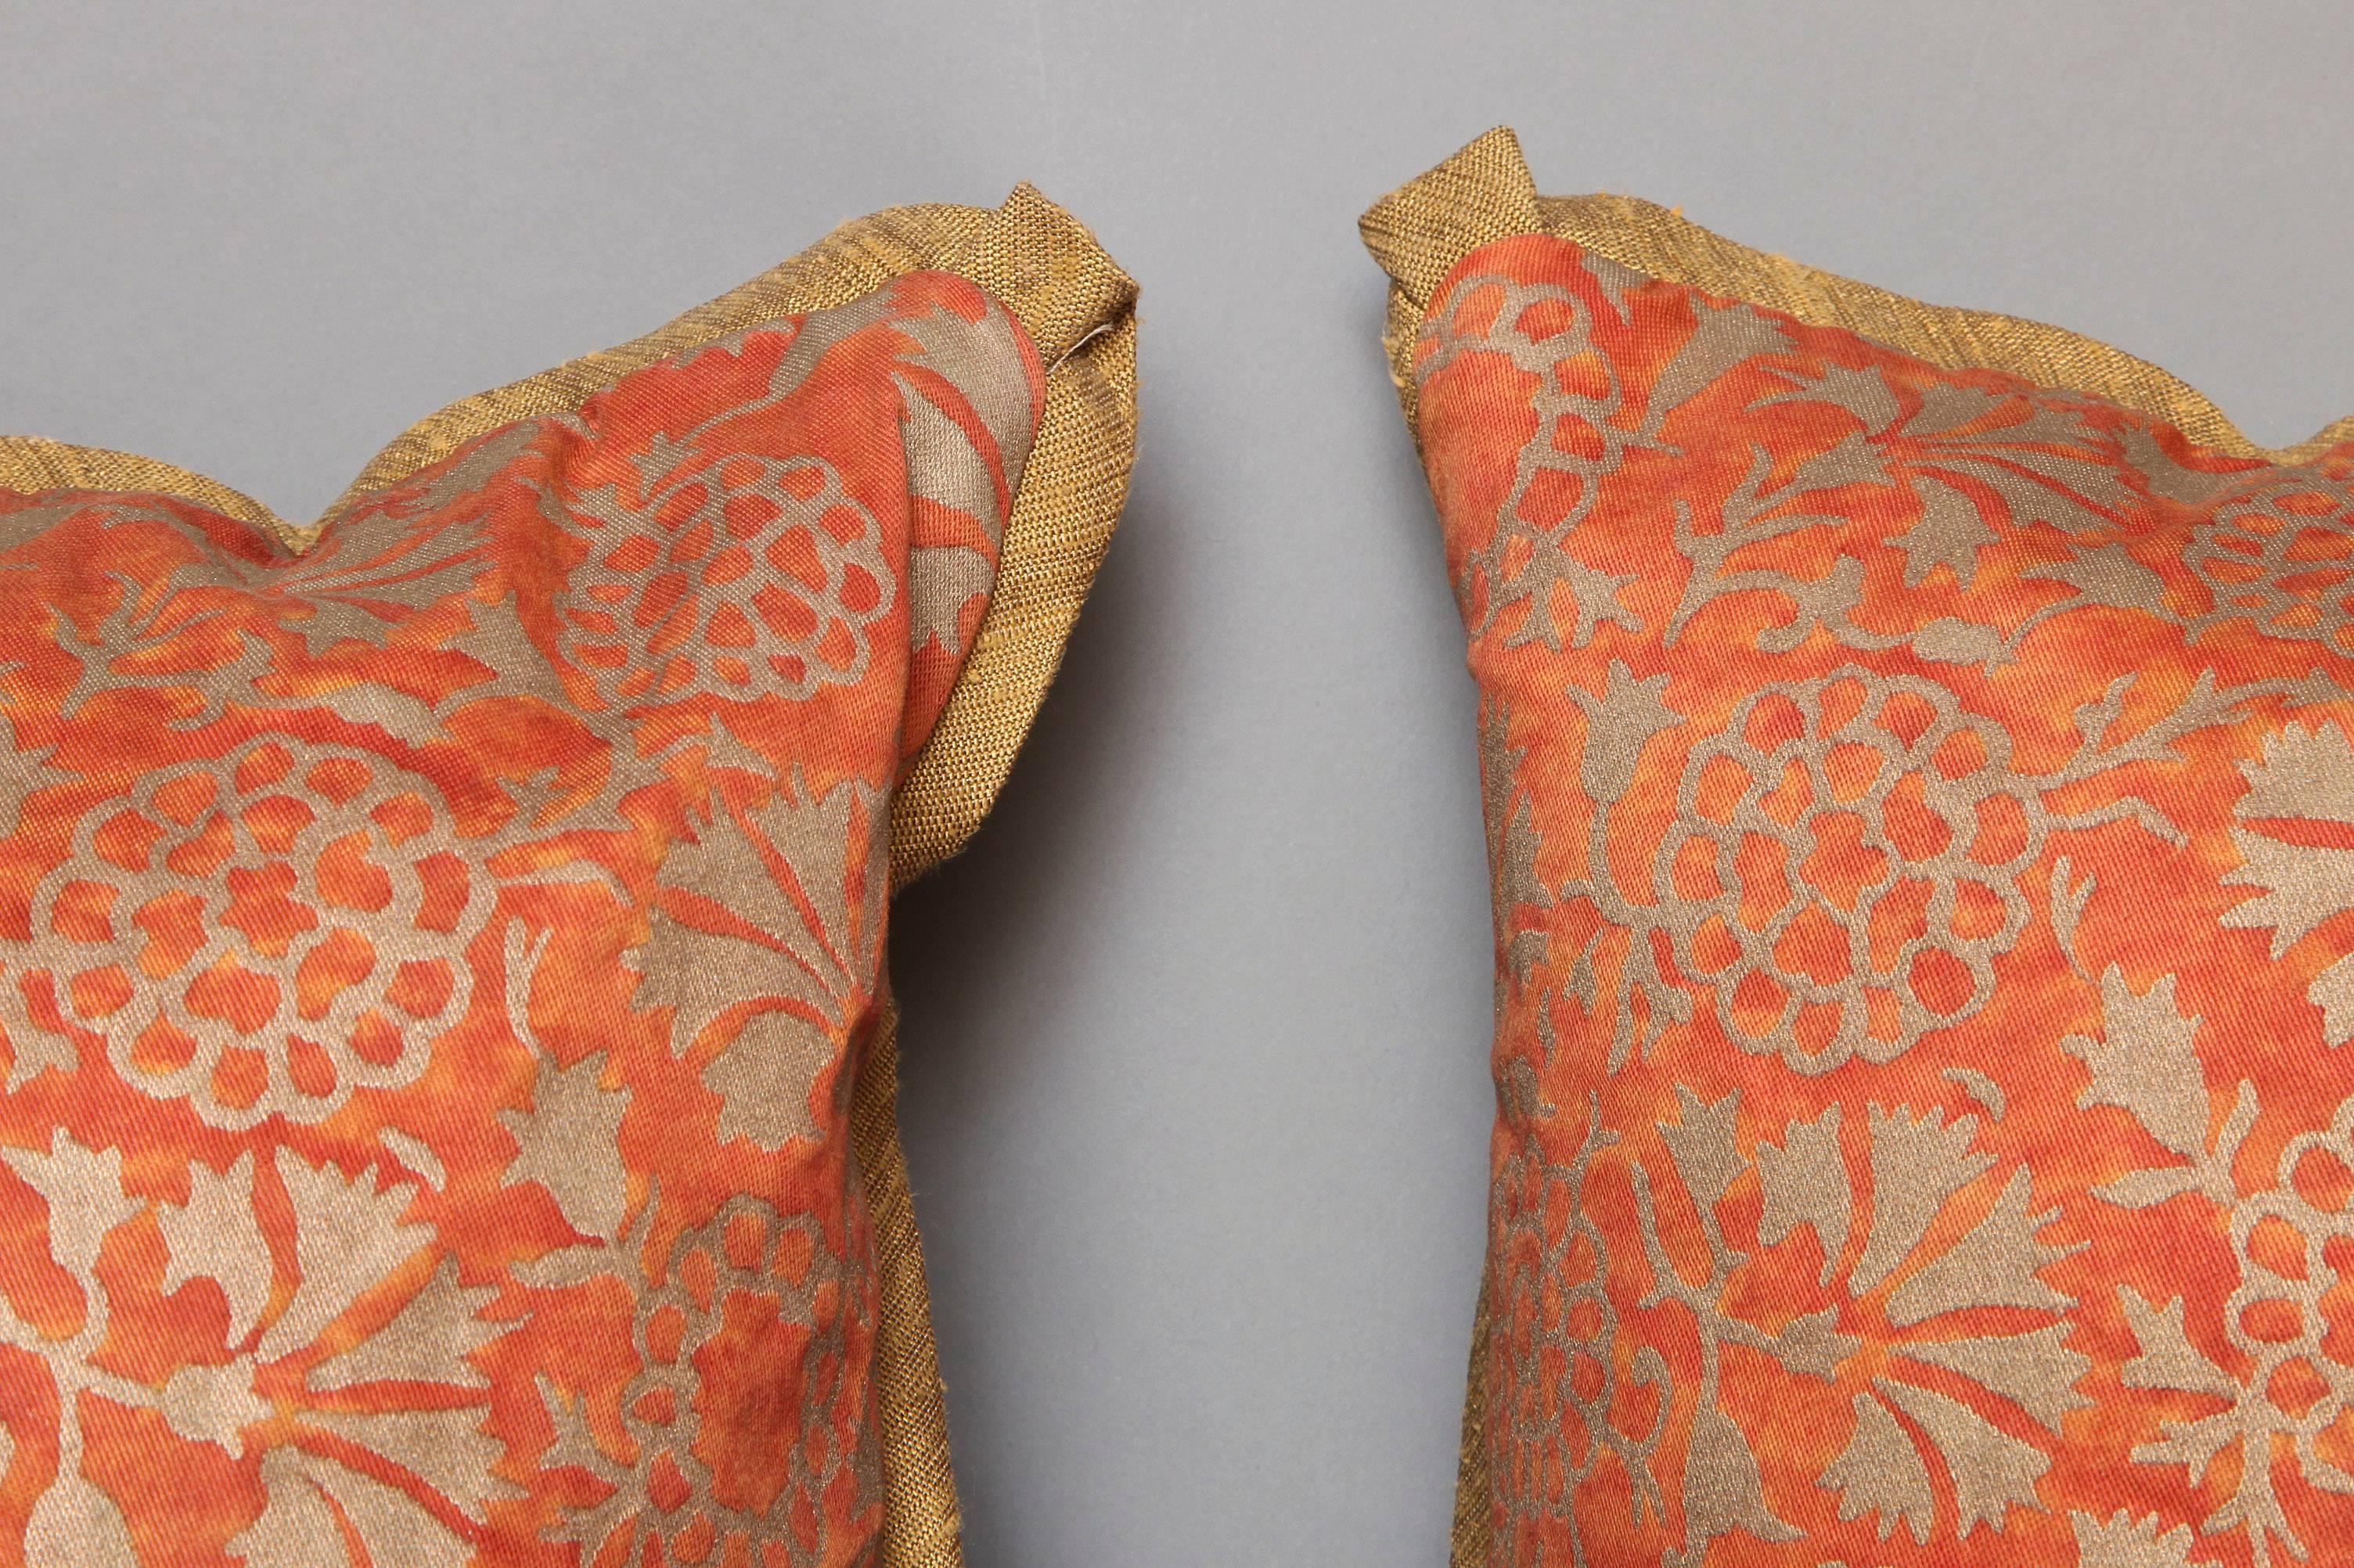 Contemporary Pair of Fortuny Fabric Cushions in the Irani Pattern